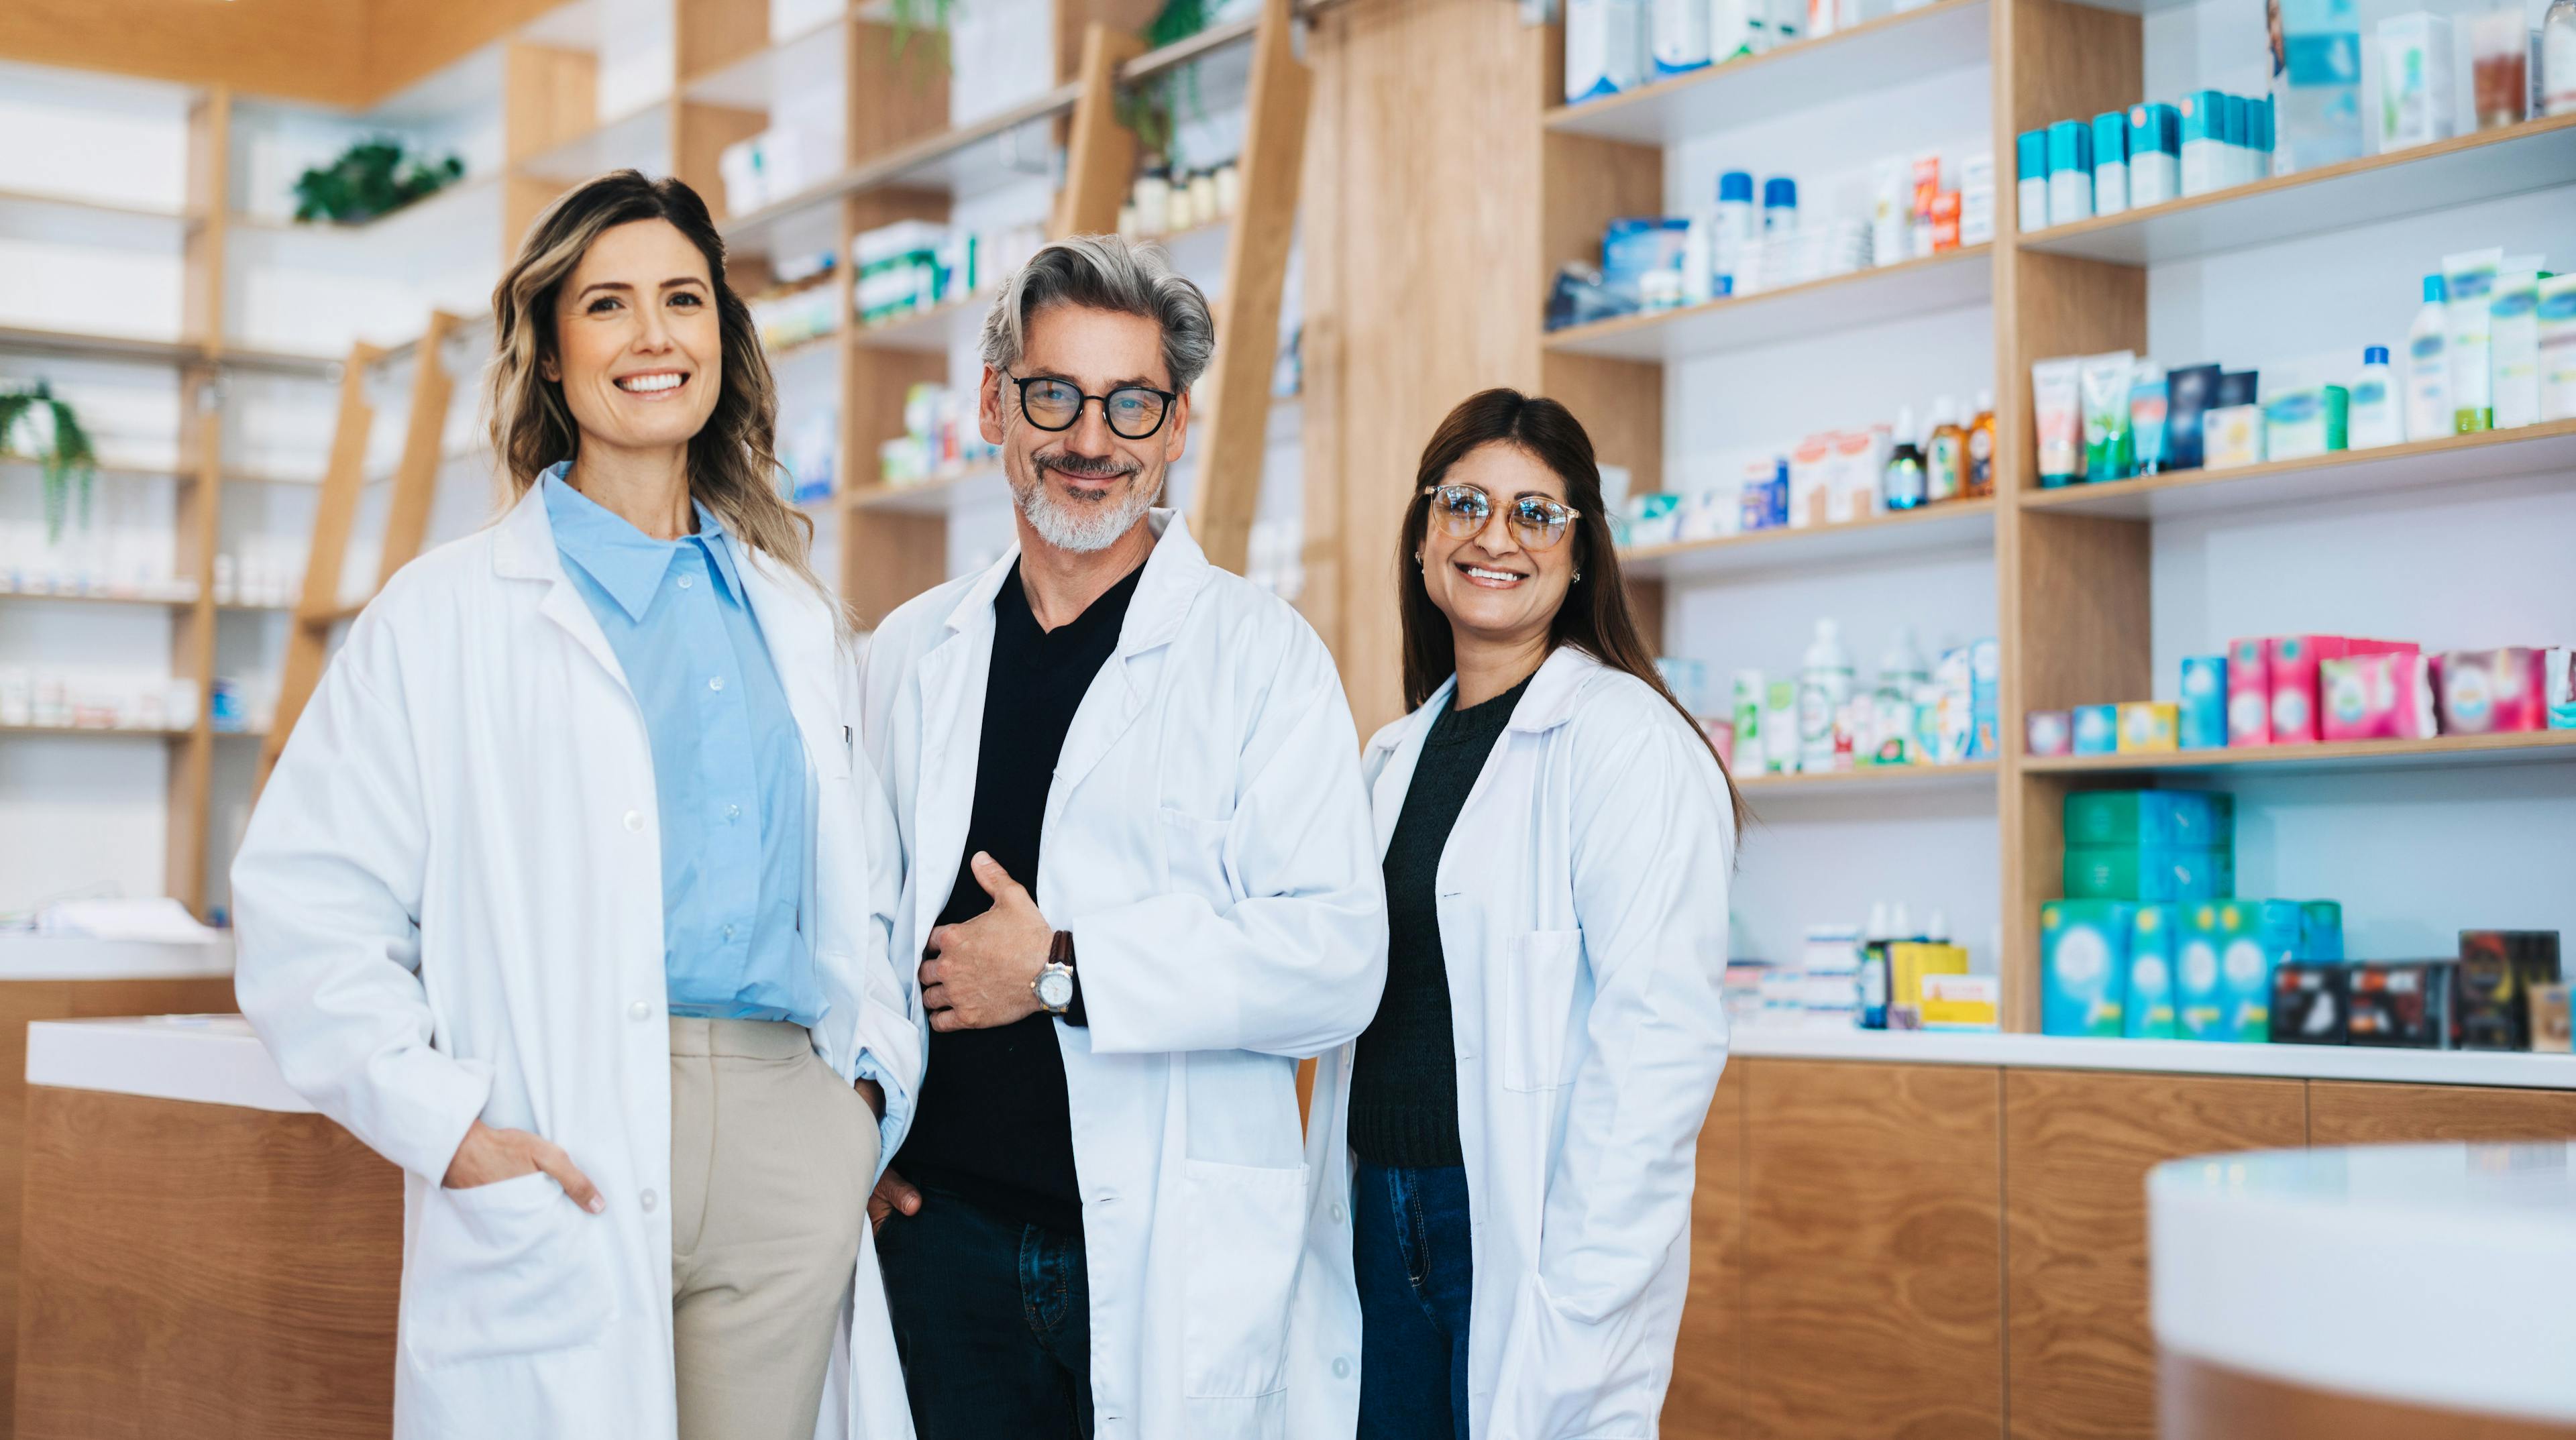 Three pharmacists standing together in a drug store - Image credit: Jacob Lund | stock.adobe.com 